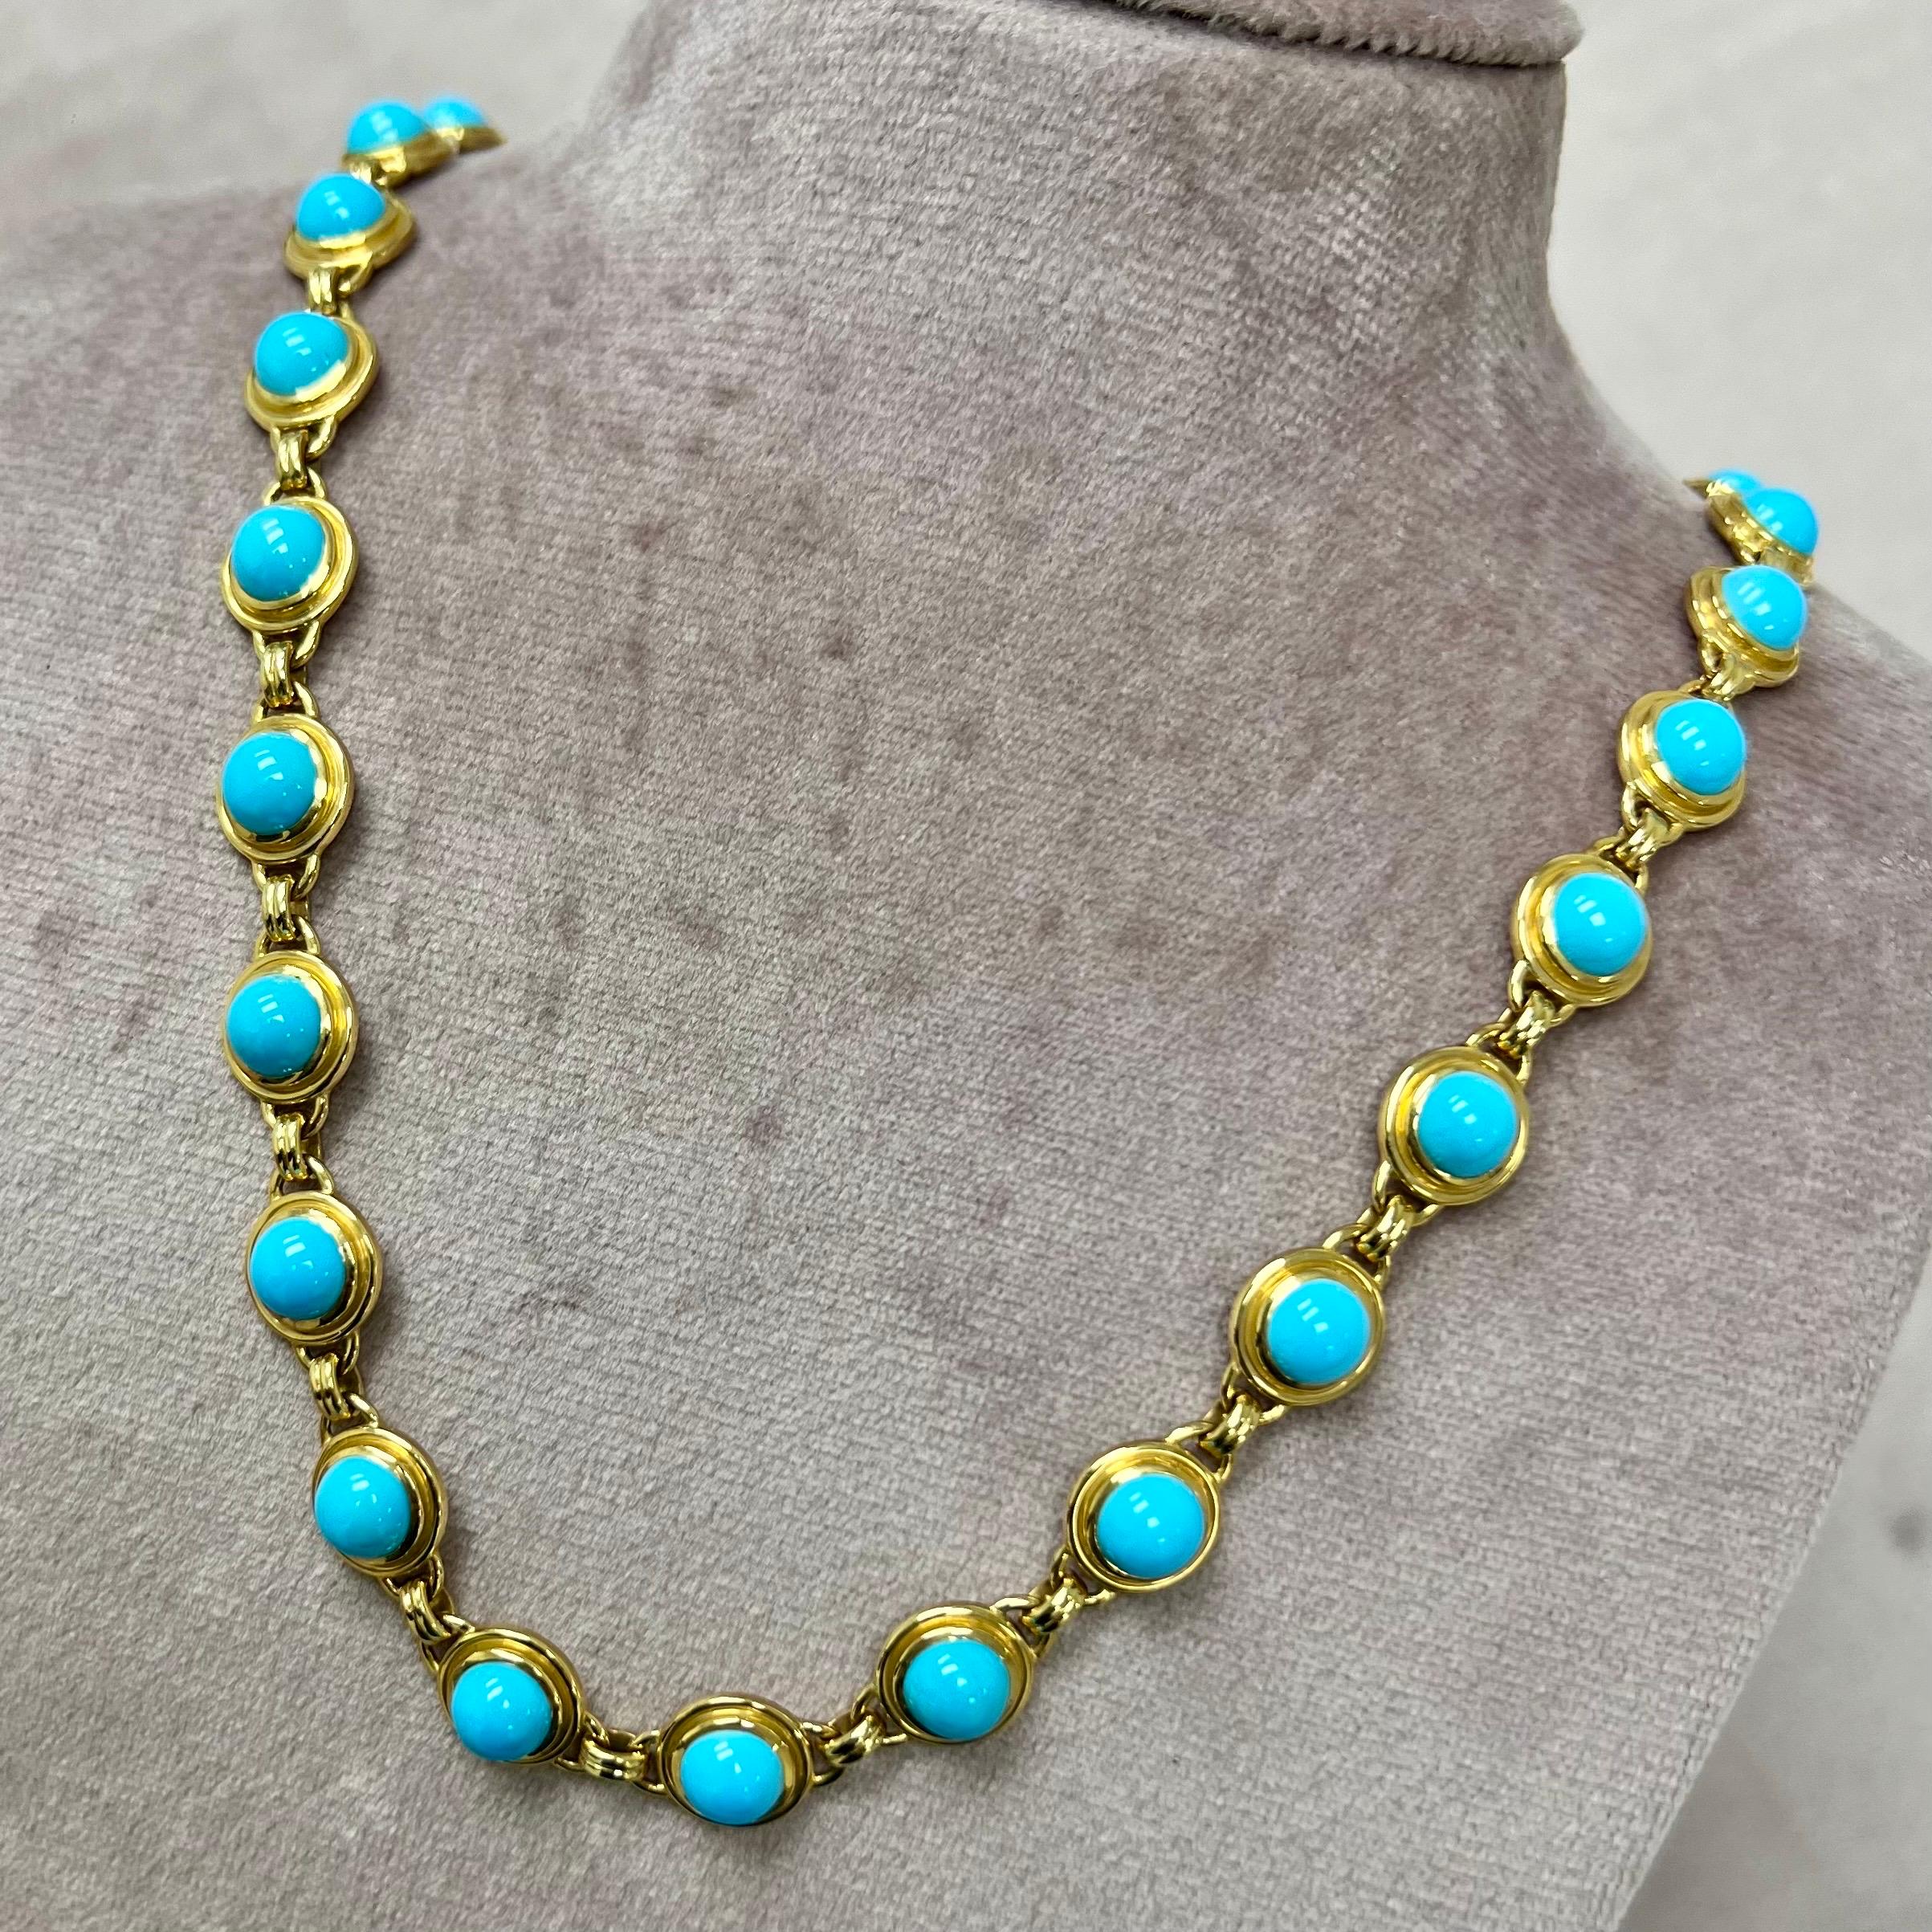 Created in 18 karat yellow gold
18 inch length
Sleeping Beauty Turquoise 35 carats approx.
18kyg Lobster clasp
Limited Edition

About the Designers

Drawing inspiration from little things, Dharmesh & Namrata Kothari have created an extraordinary and